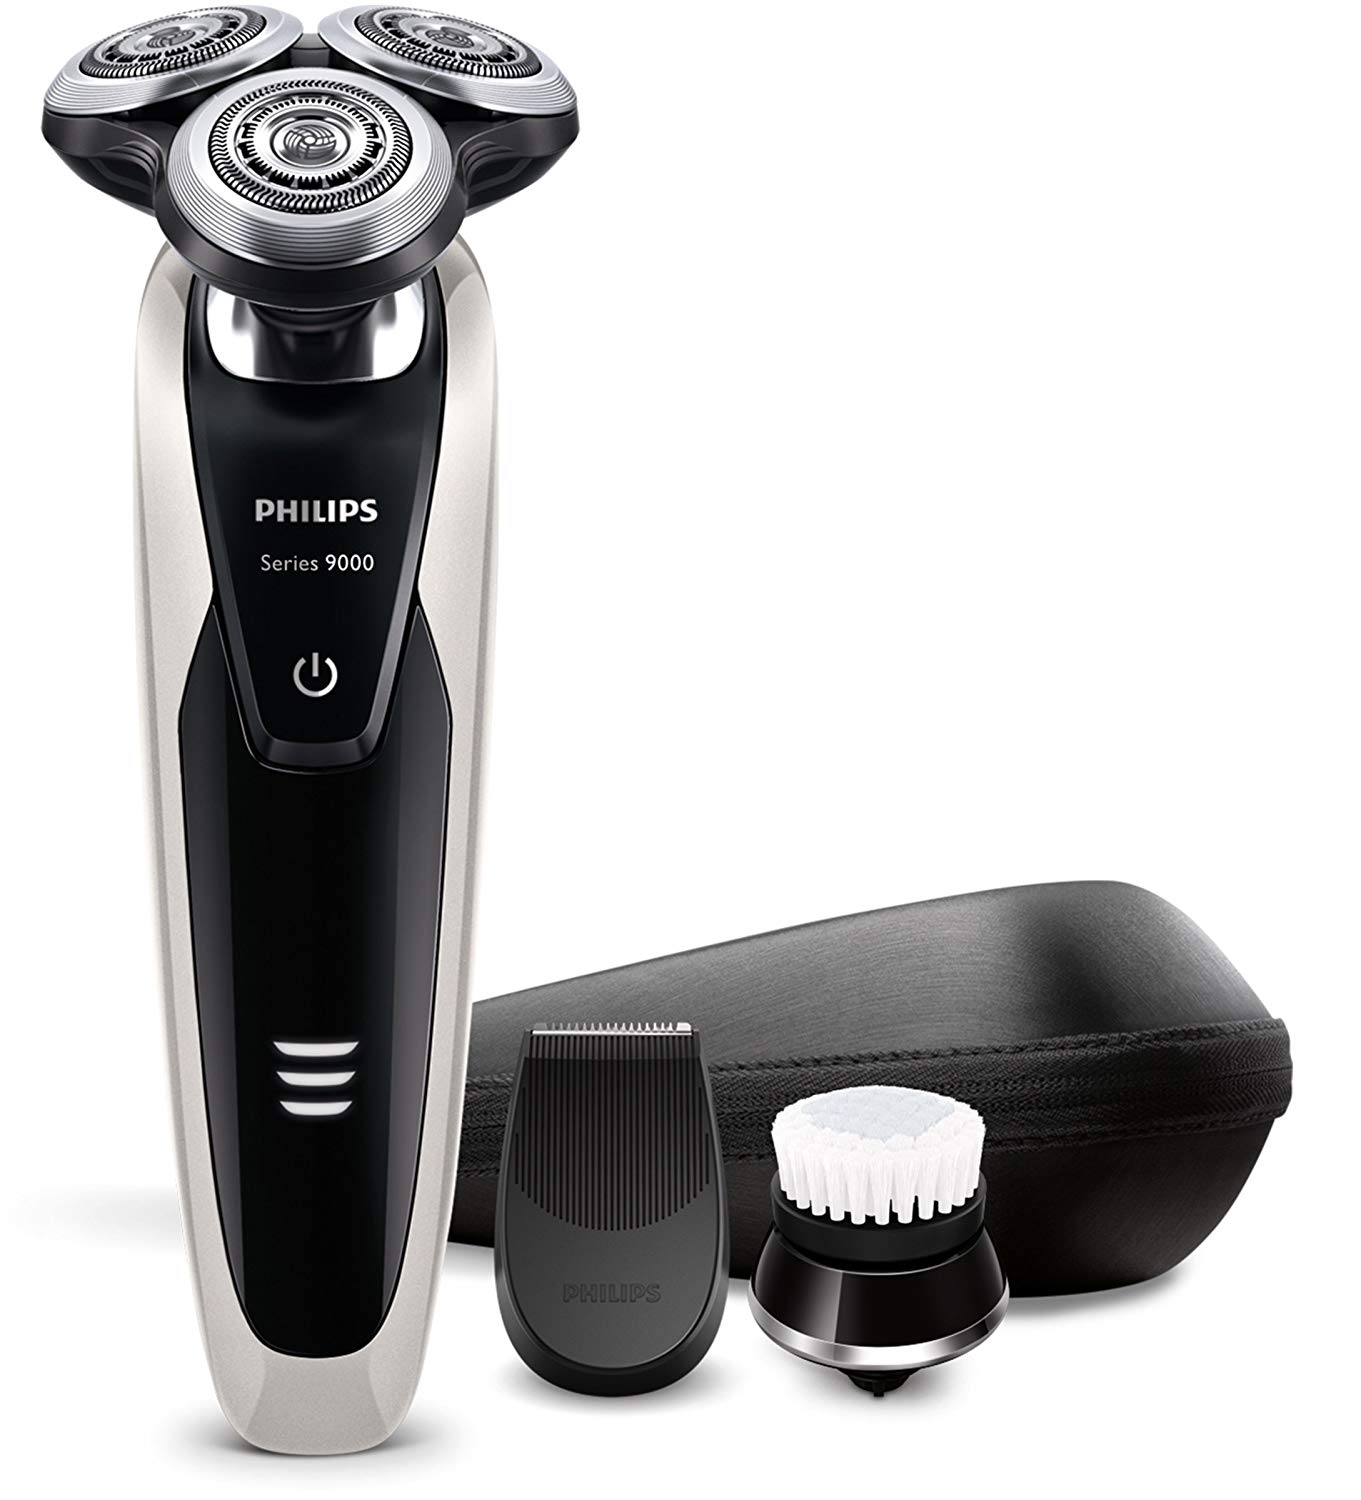 Philips Serie 9000 + pack viaje solo 108,4€